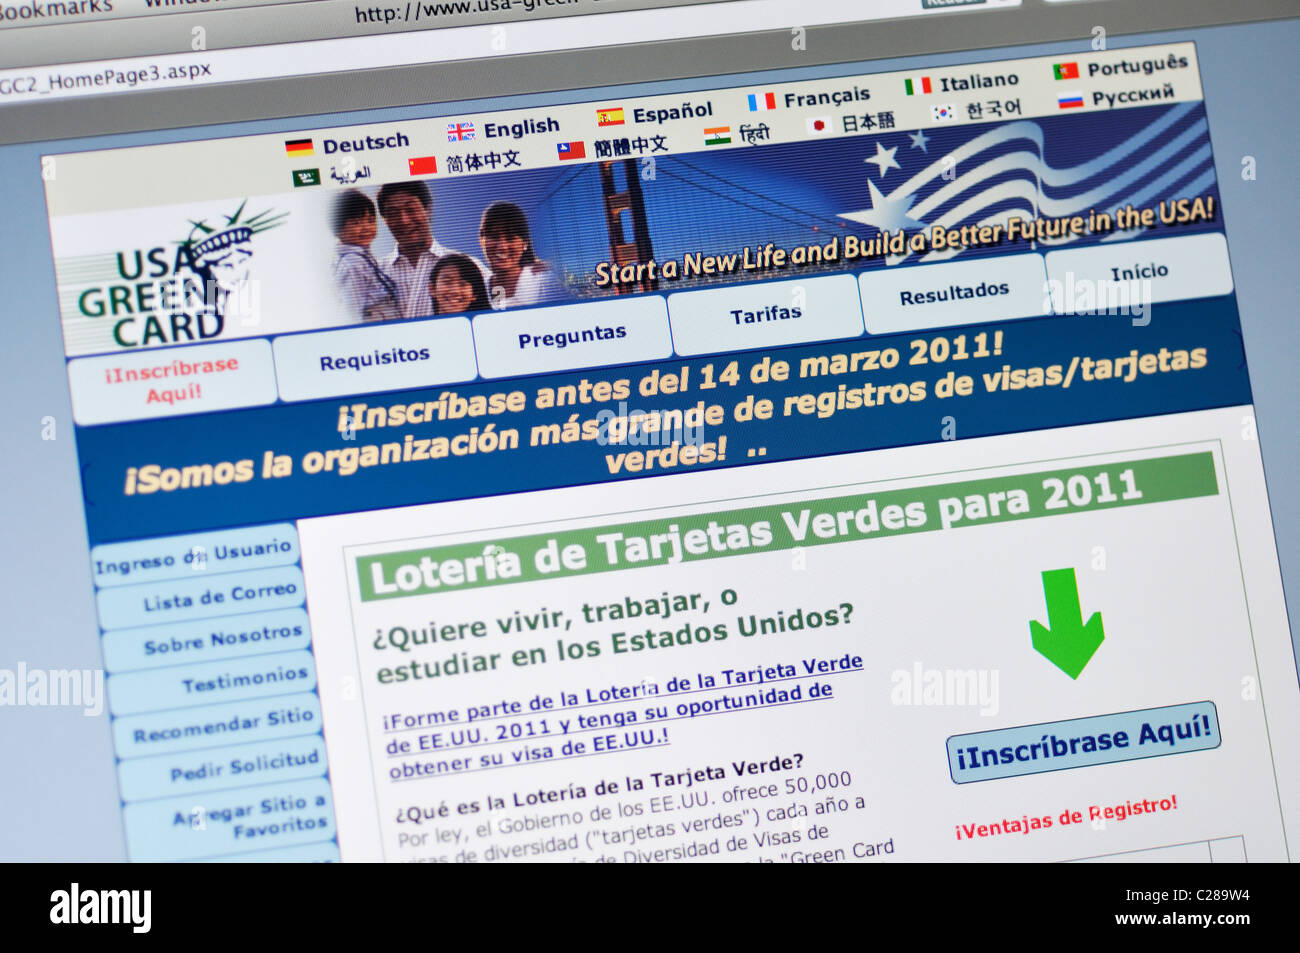 USA Green Card Lottery website - in Spanish Stock Photo